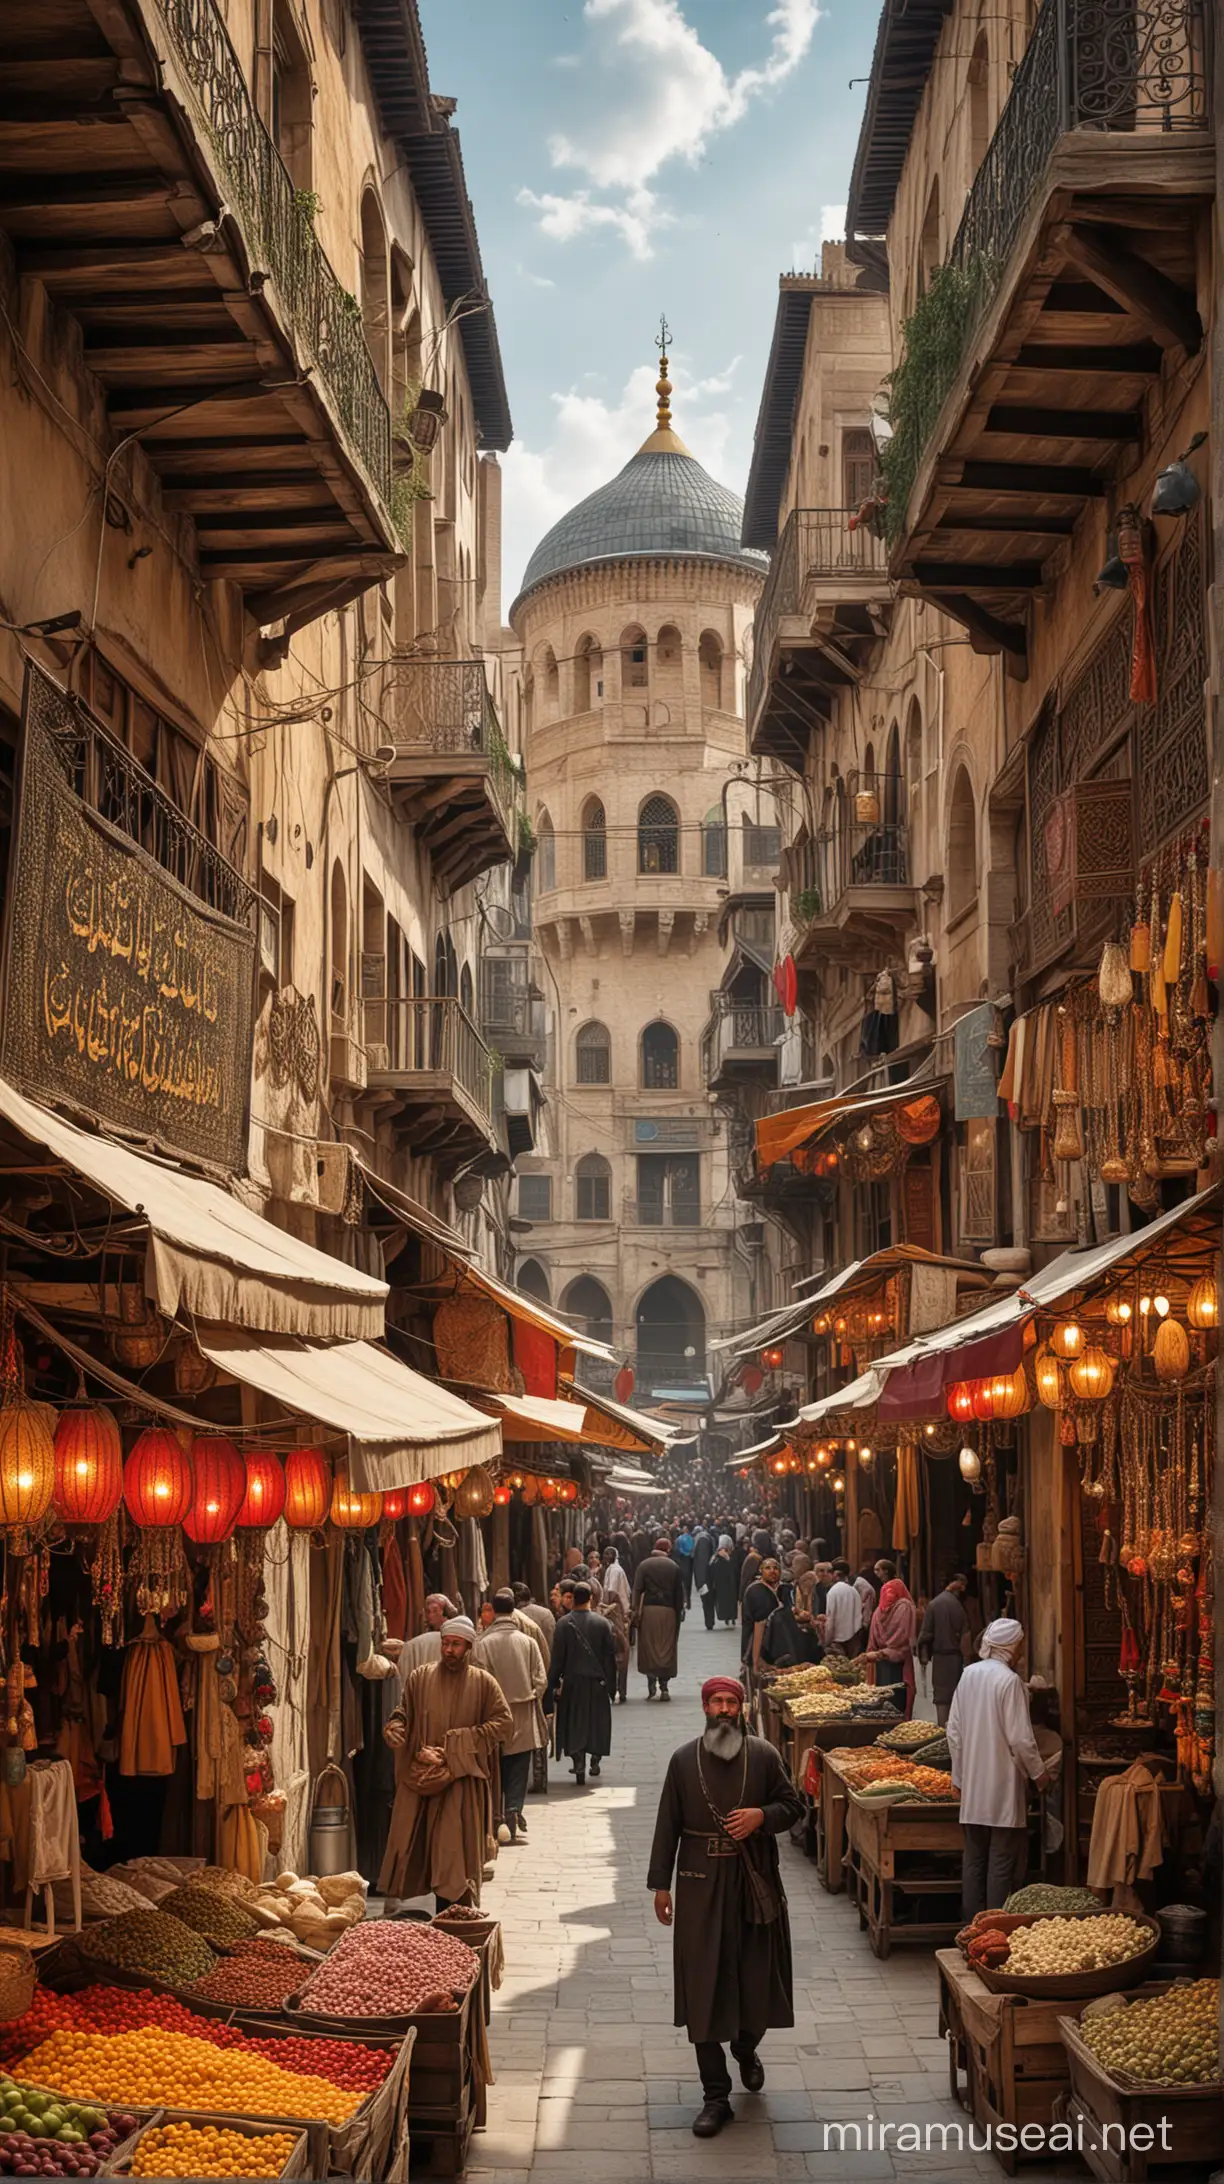 Produce an image showcasing the multiculturalism of the Ottoman Empire in the 17th century, with bustling markets, vibrant bazaars, and diverse people from across the empire's vast territories, including Turks, Arabs, Greeks, and Persians, mingling amidst the architecture of Constantinople, the empire's magnificent capital.